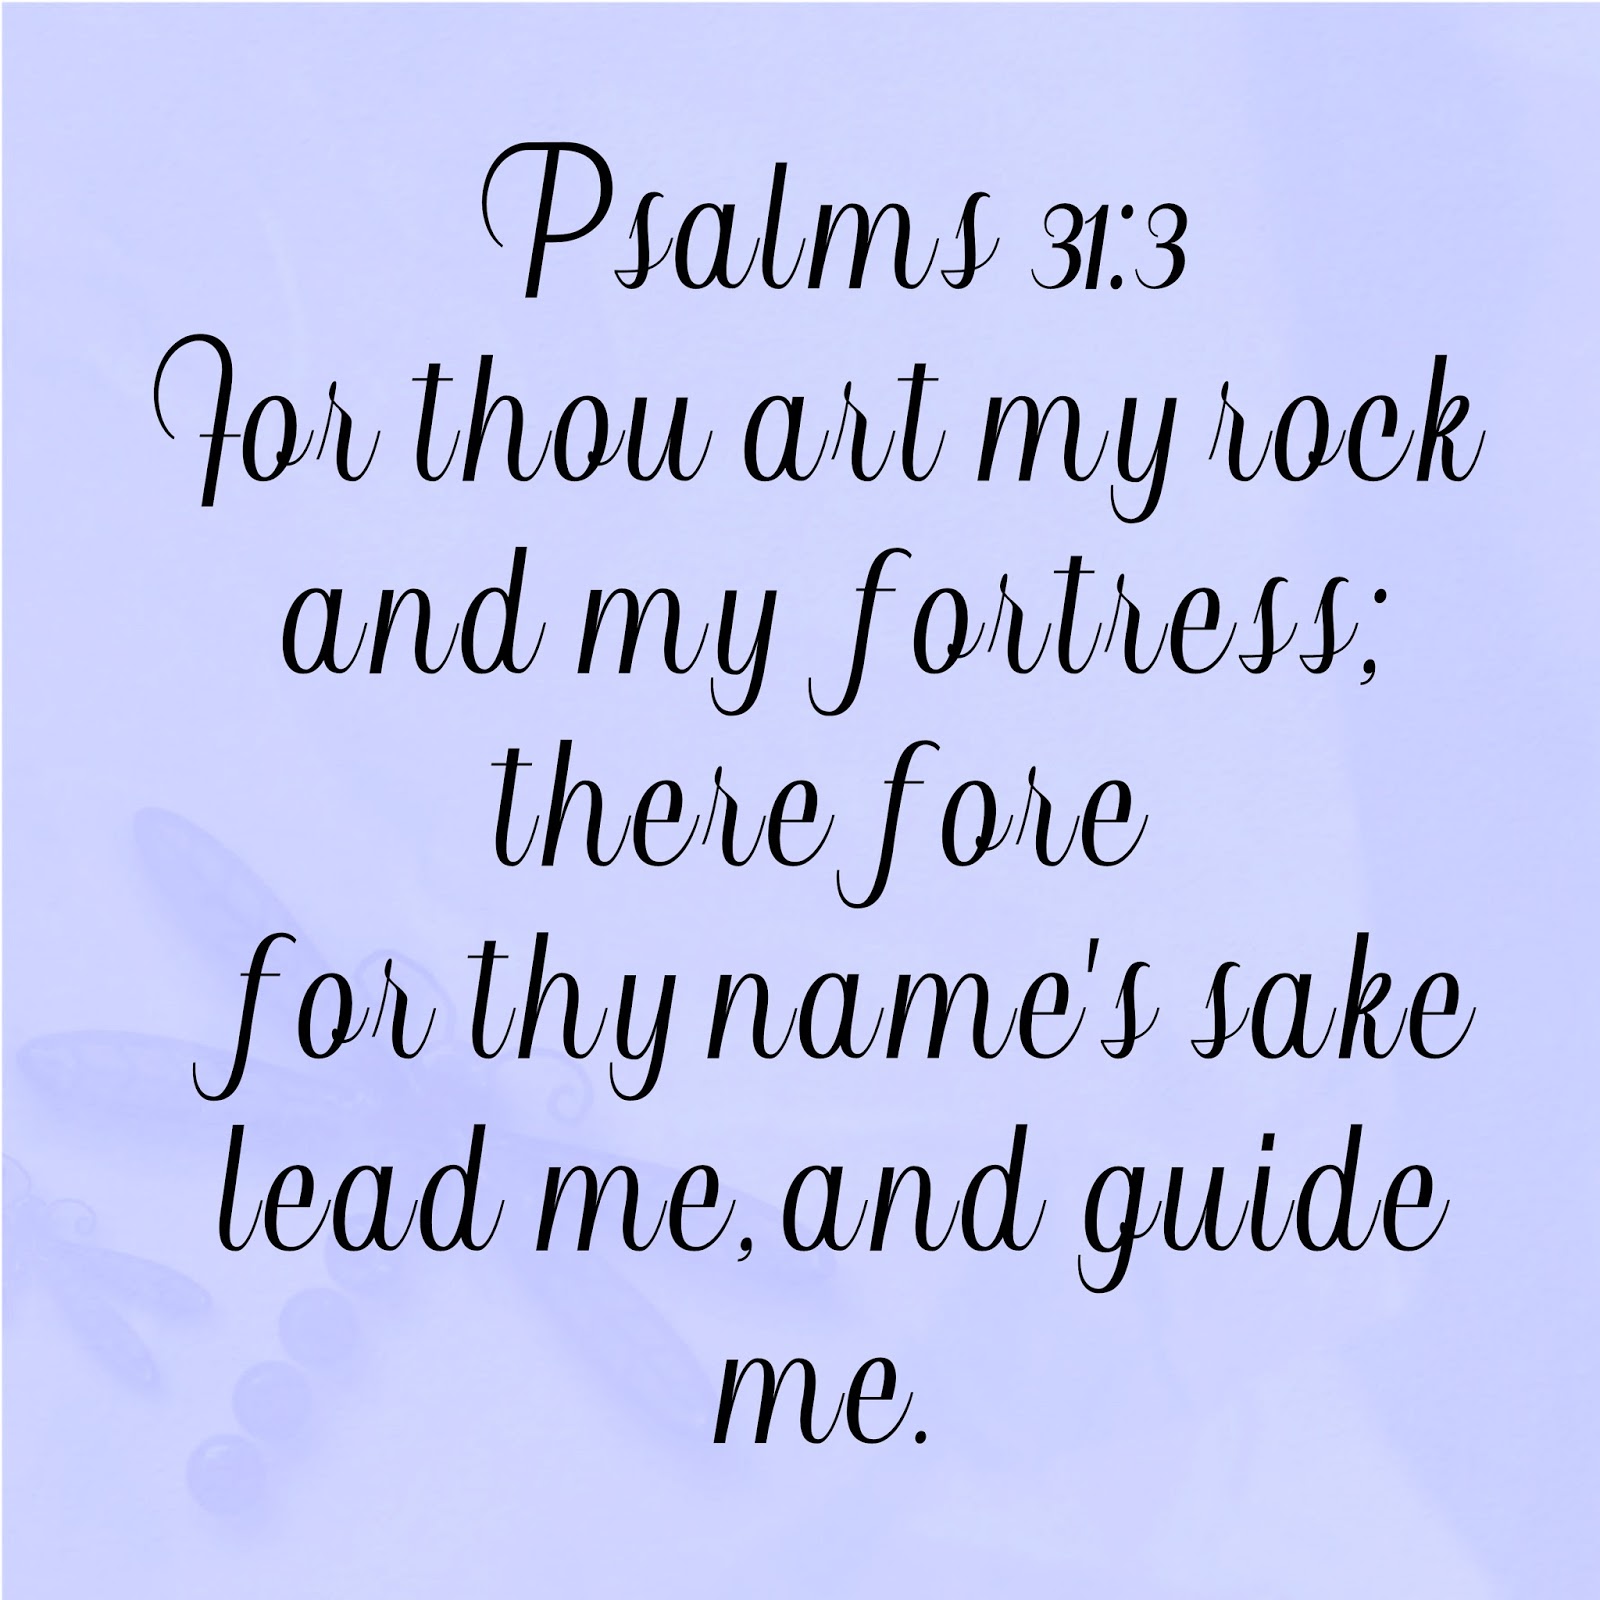 Christian Images In My Treasure Box: Psalms 31 3